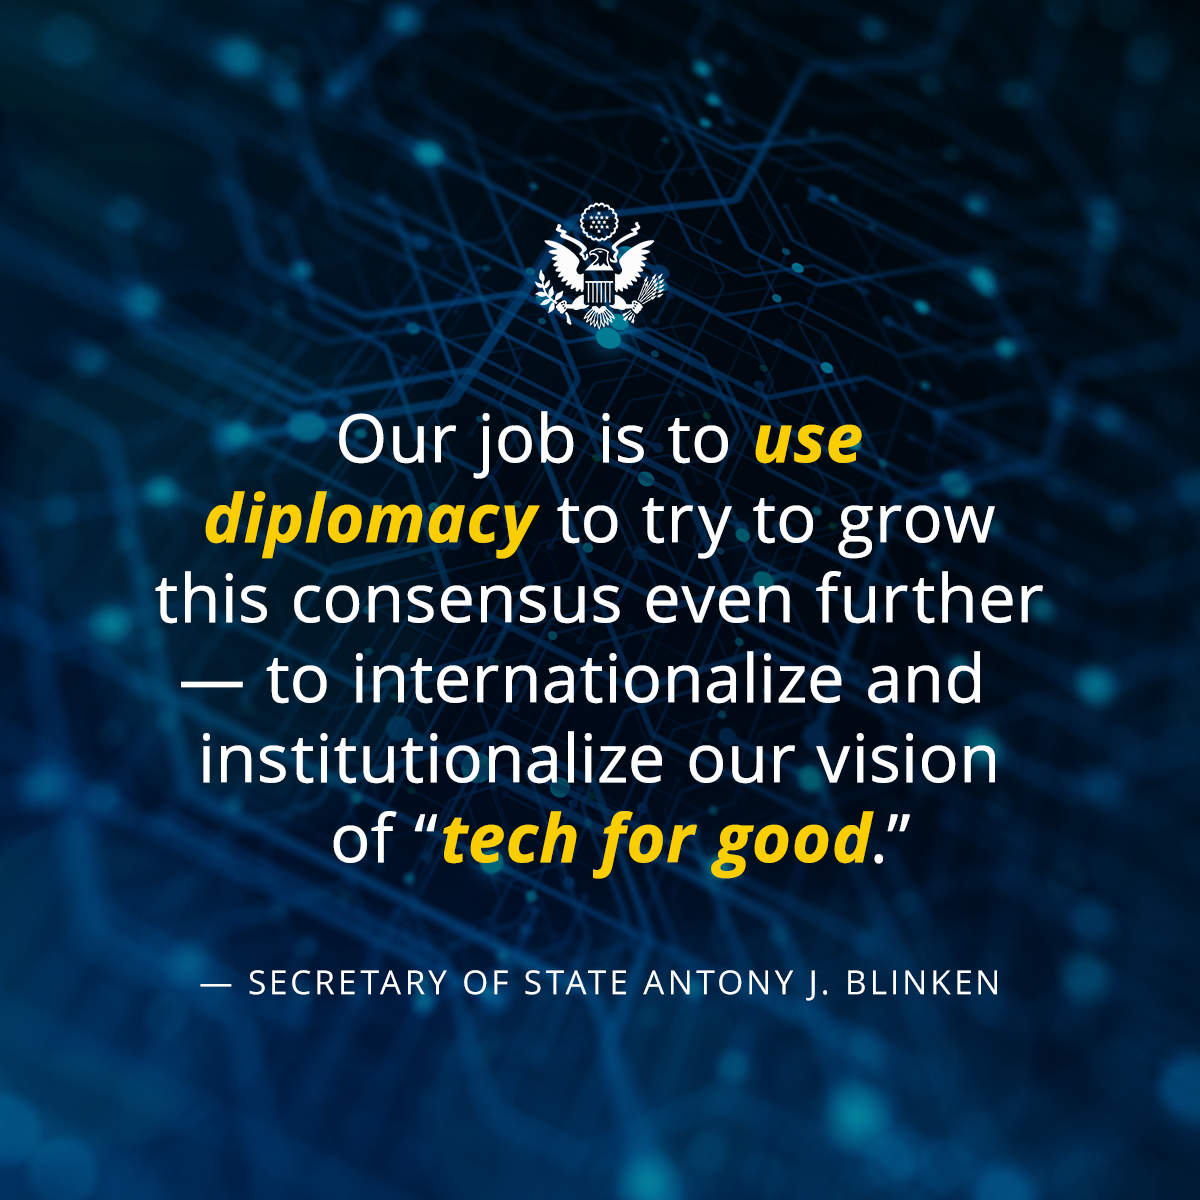 The U.S. believes emerging and foundational technologies can and should be used to drive development and prosperity, promote respect for human rights, and solve shared global challenges.